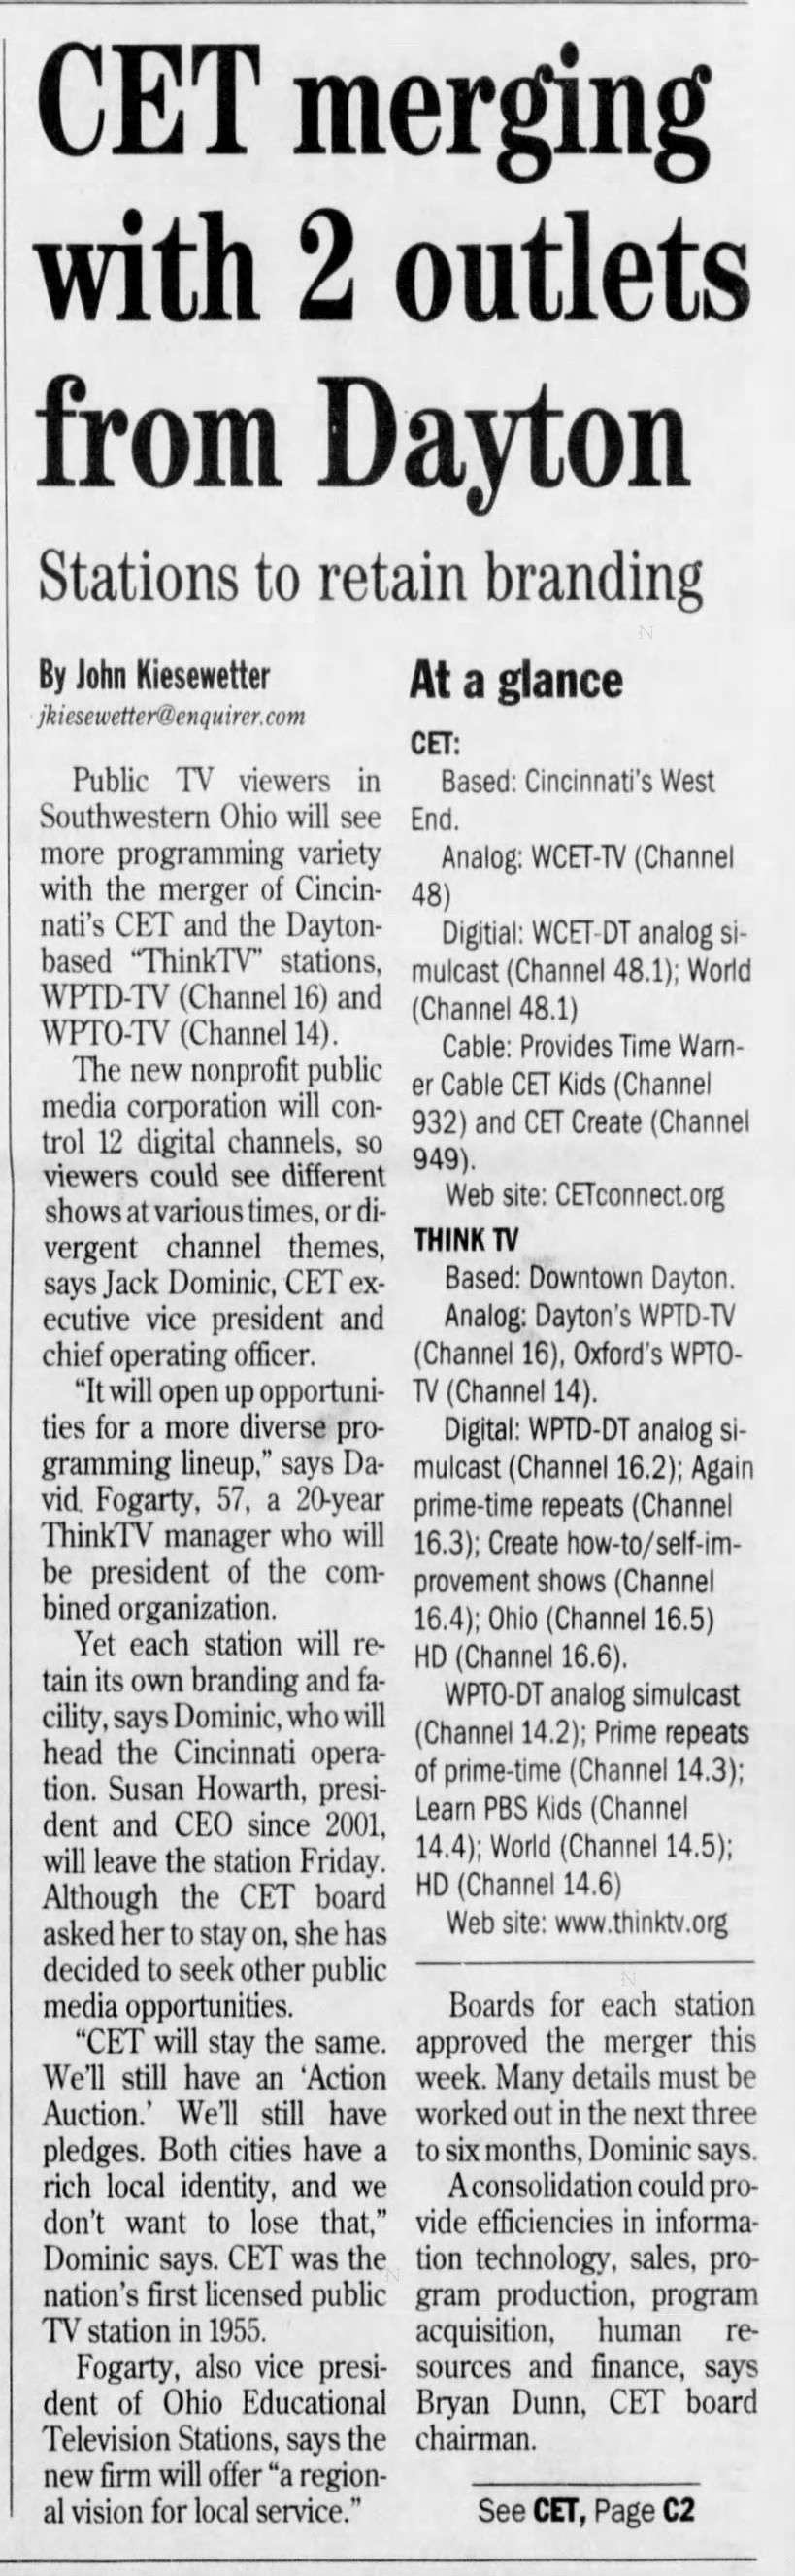 CET merging with 2 outlets from Dayton: Stations to retain branding